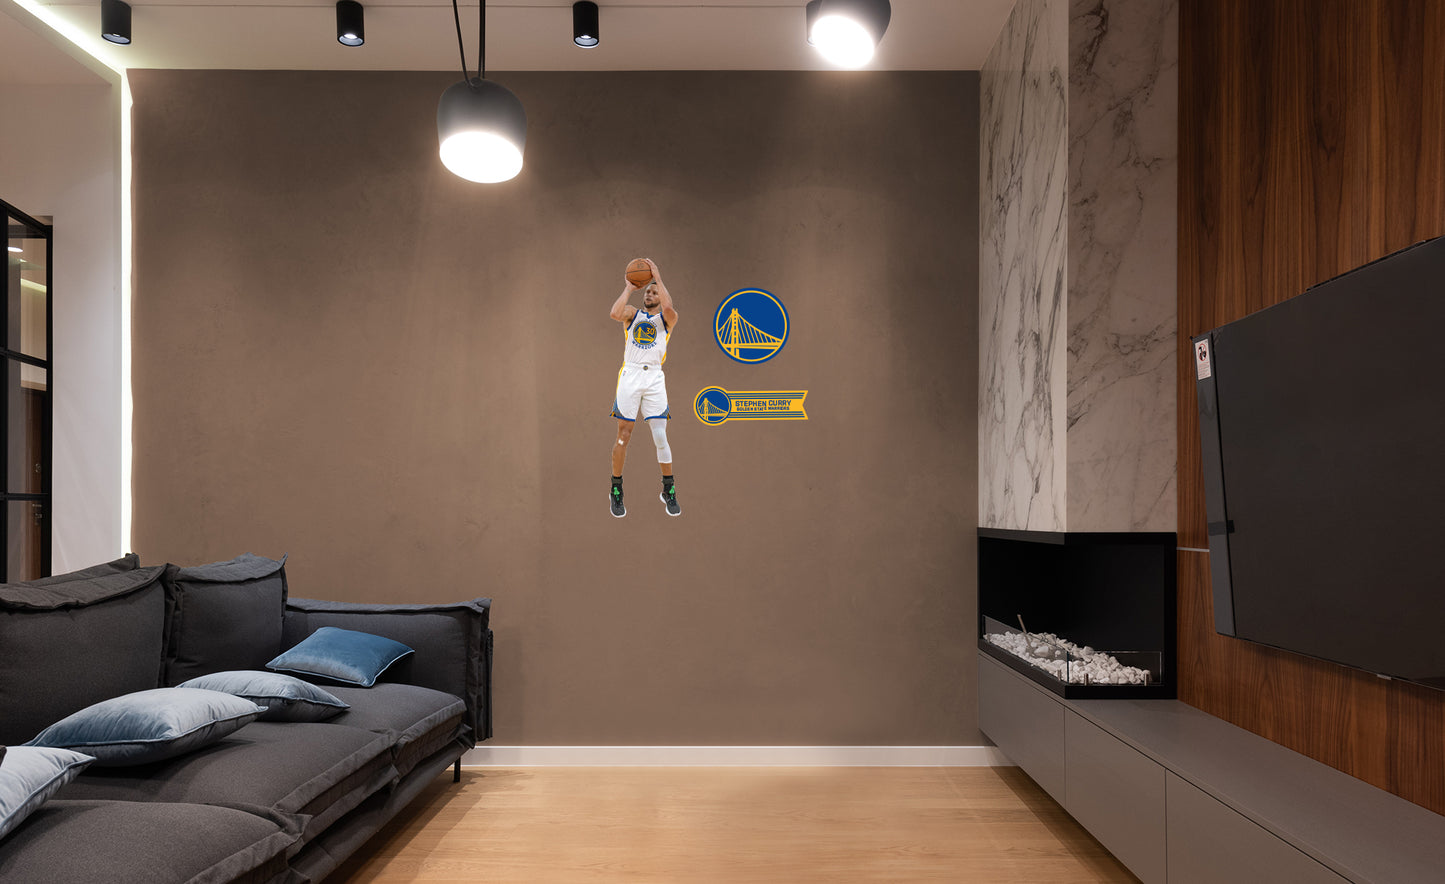 Golden State Warriors: Stephen Curry  Jumper        - Officially Licensed NBA Removable     Adhesive Decal